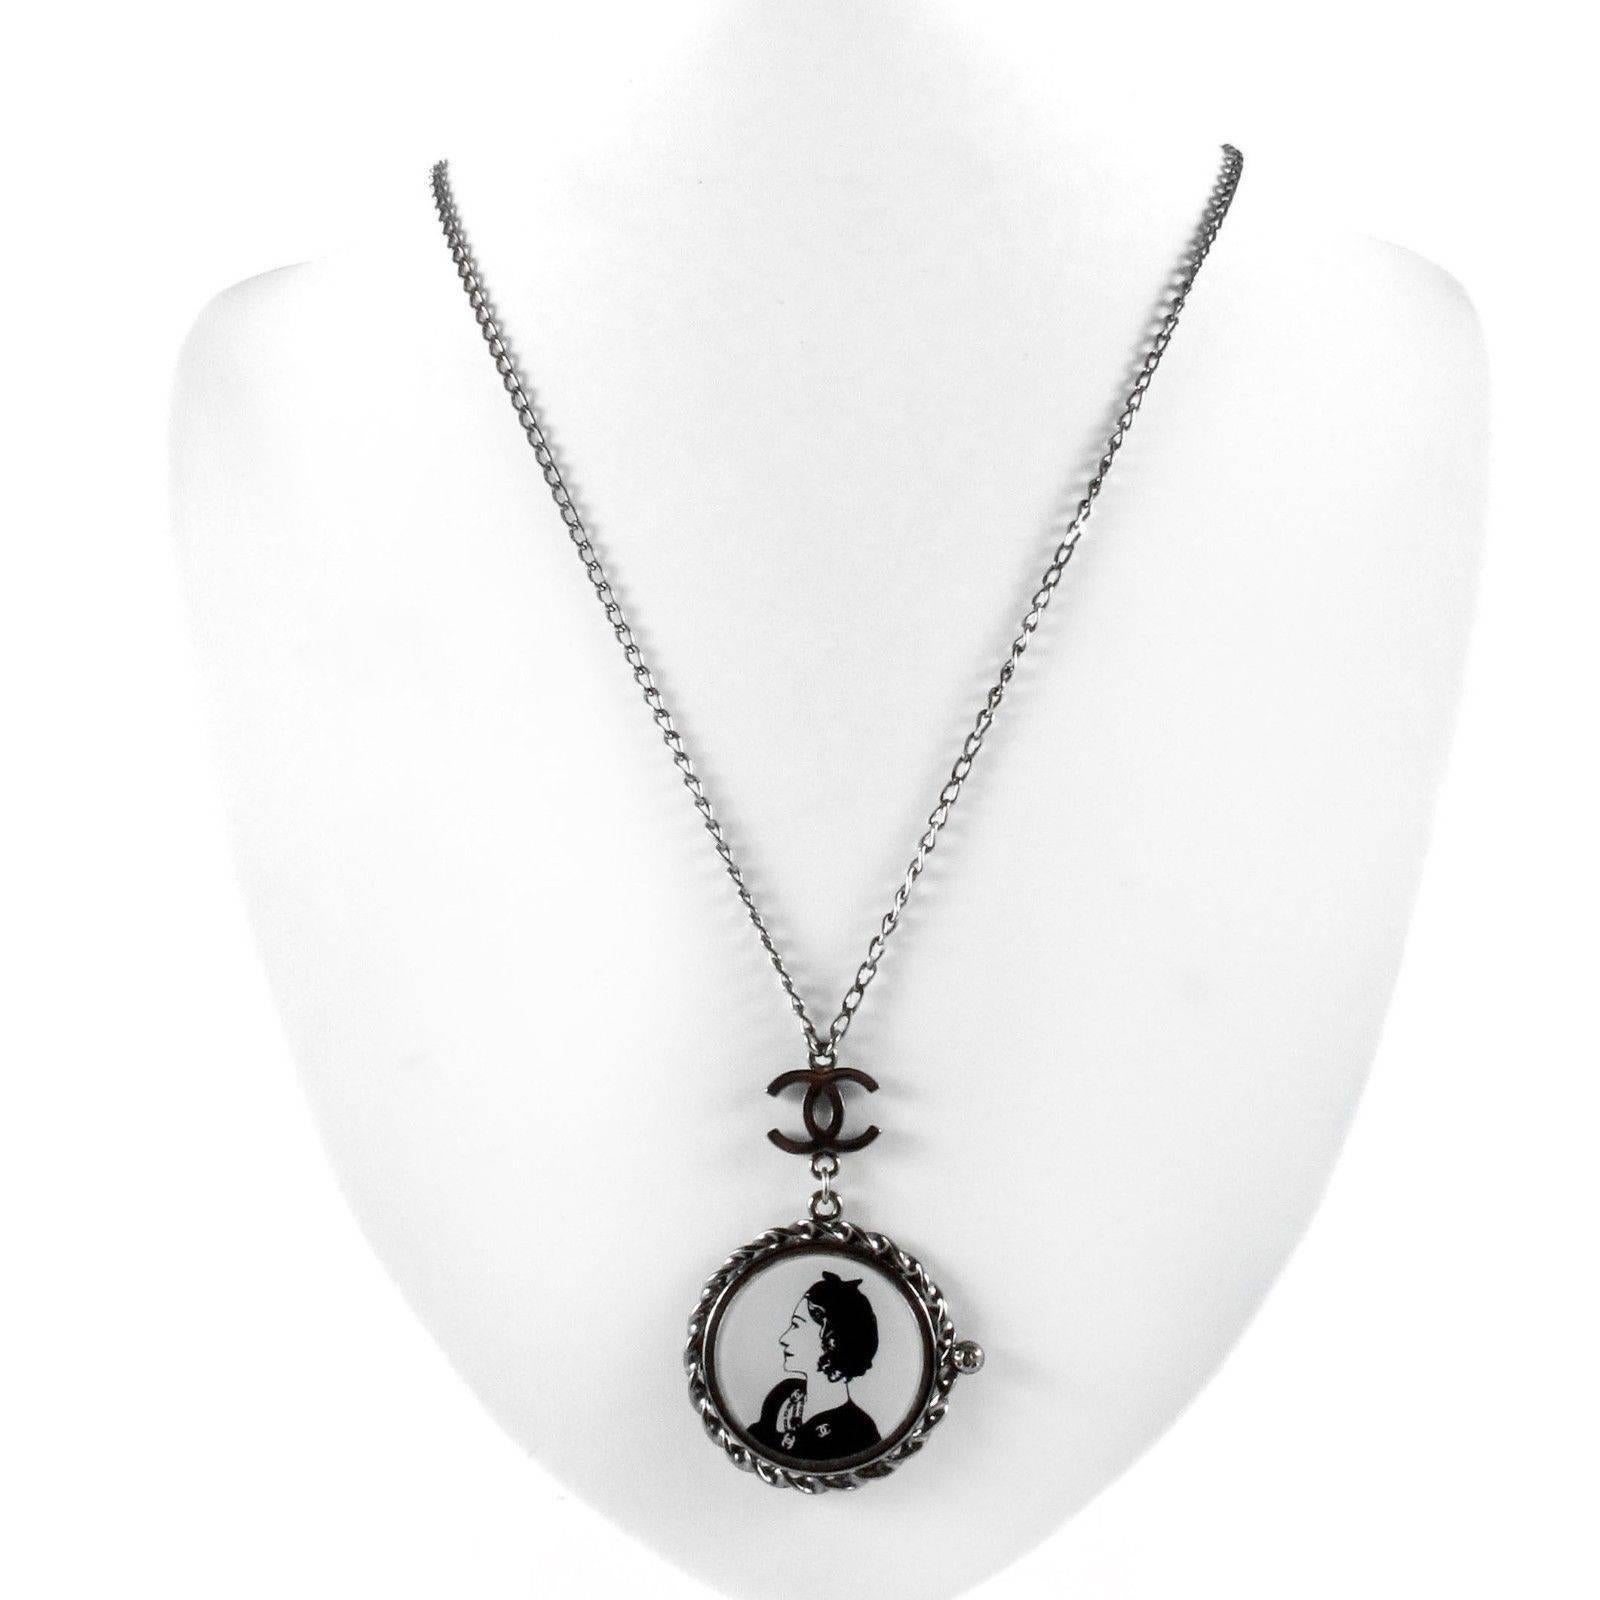 Color: Silver - Multi

Material: Resin / Metal

------------------------------------------------------------

Details:

- silver tone hardware

- coco mademoiselle logo at pendant

- CC logo charm above pendant

- lobster clasp